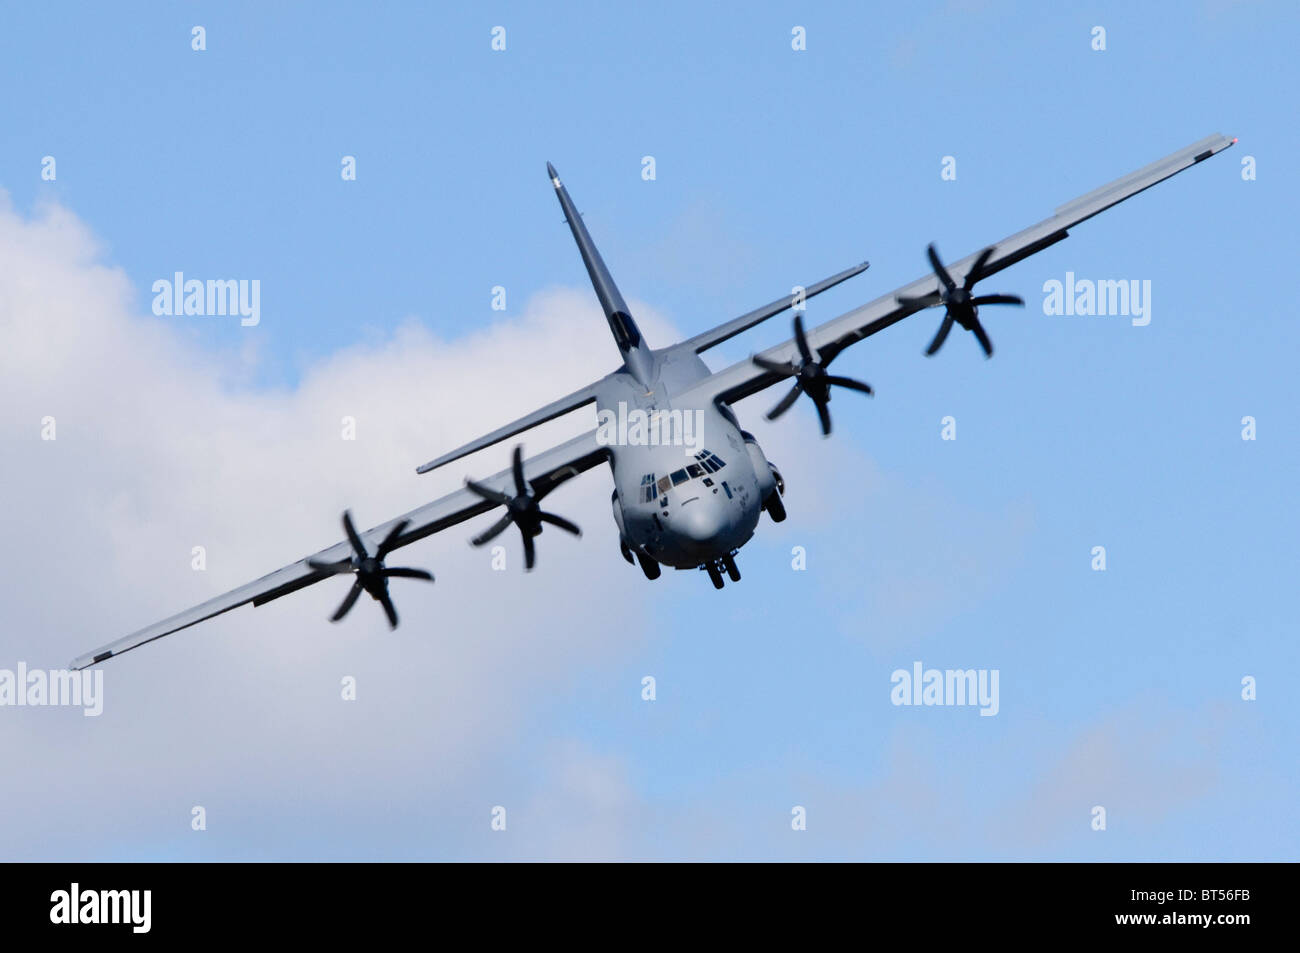 Lockheed C-130J Hercules operated by the US Air Force demonstrating a Khe Sahn landing approach at Farnborough Airshow Stock Photo